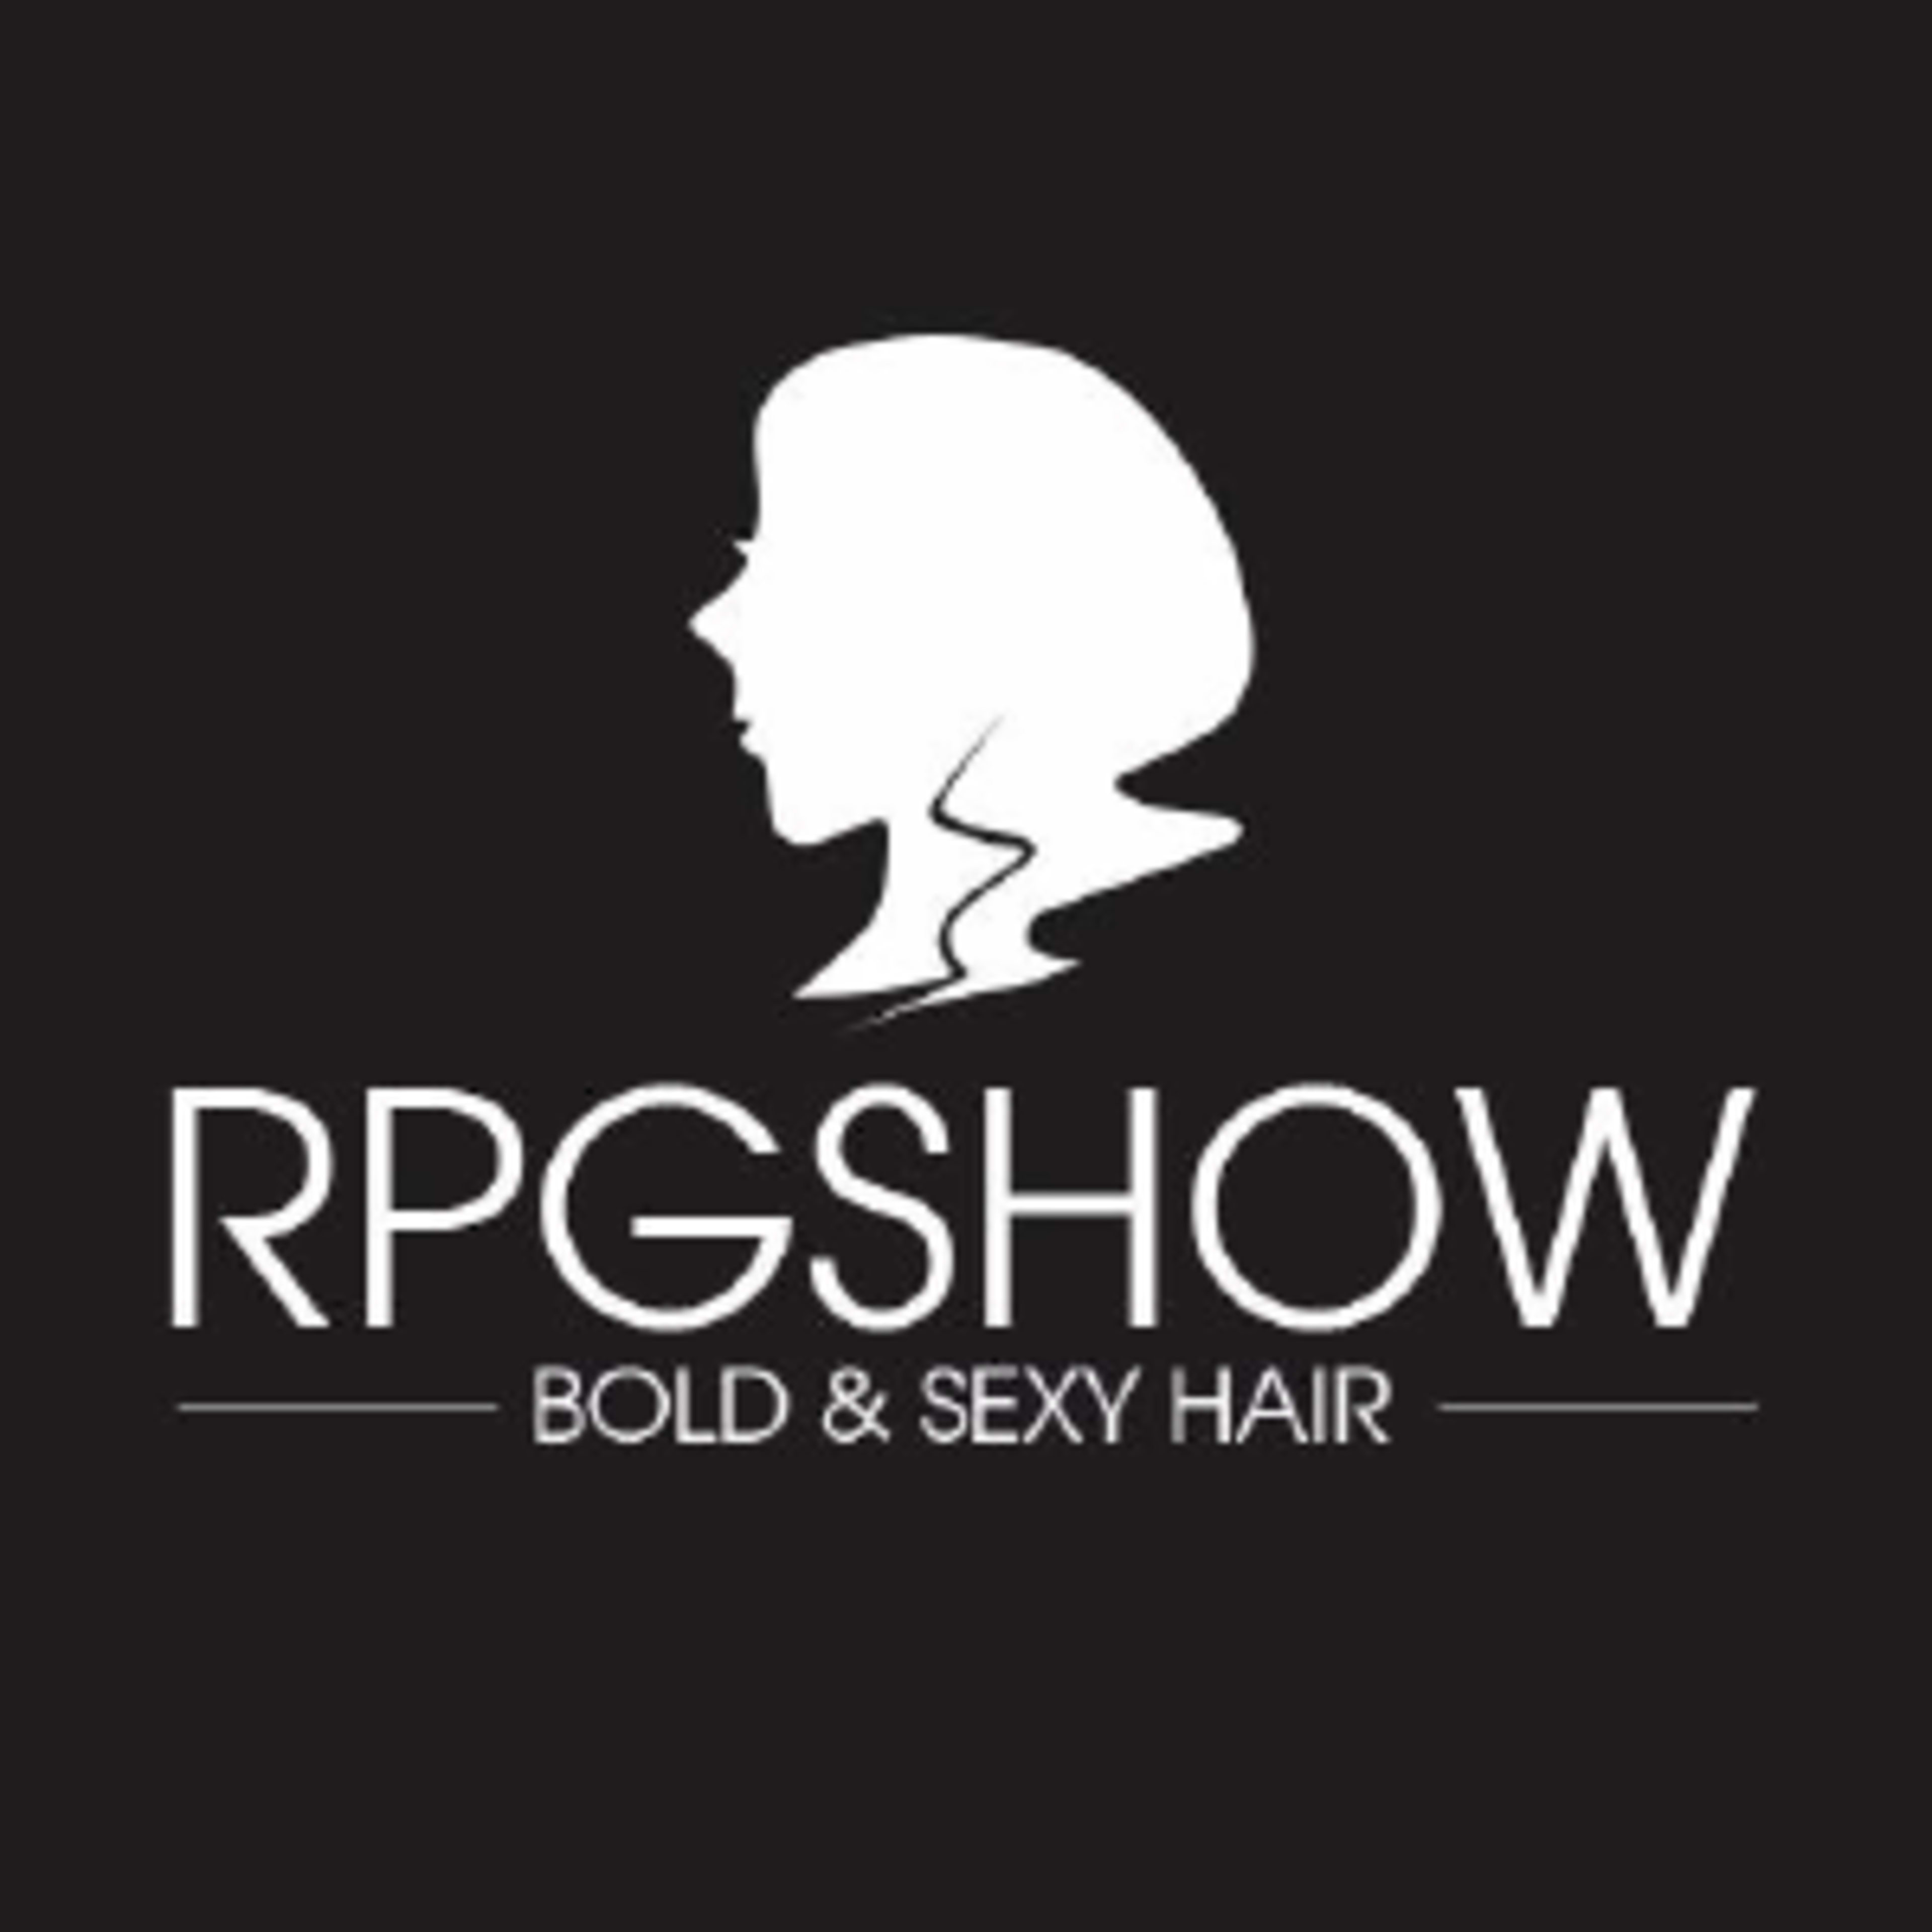 Www.rpgshow.comCode